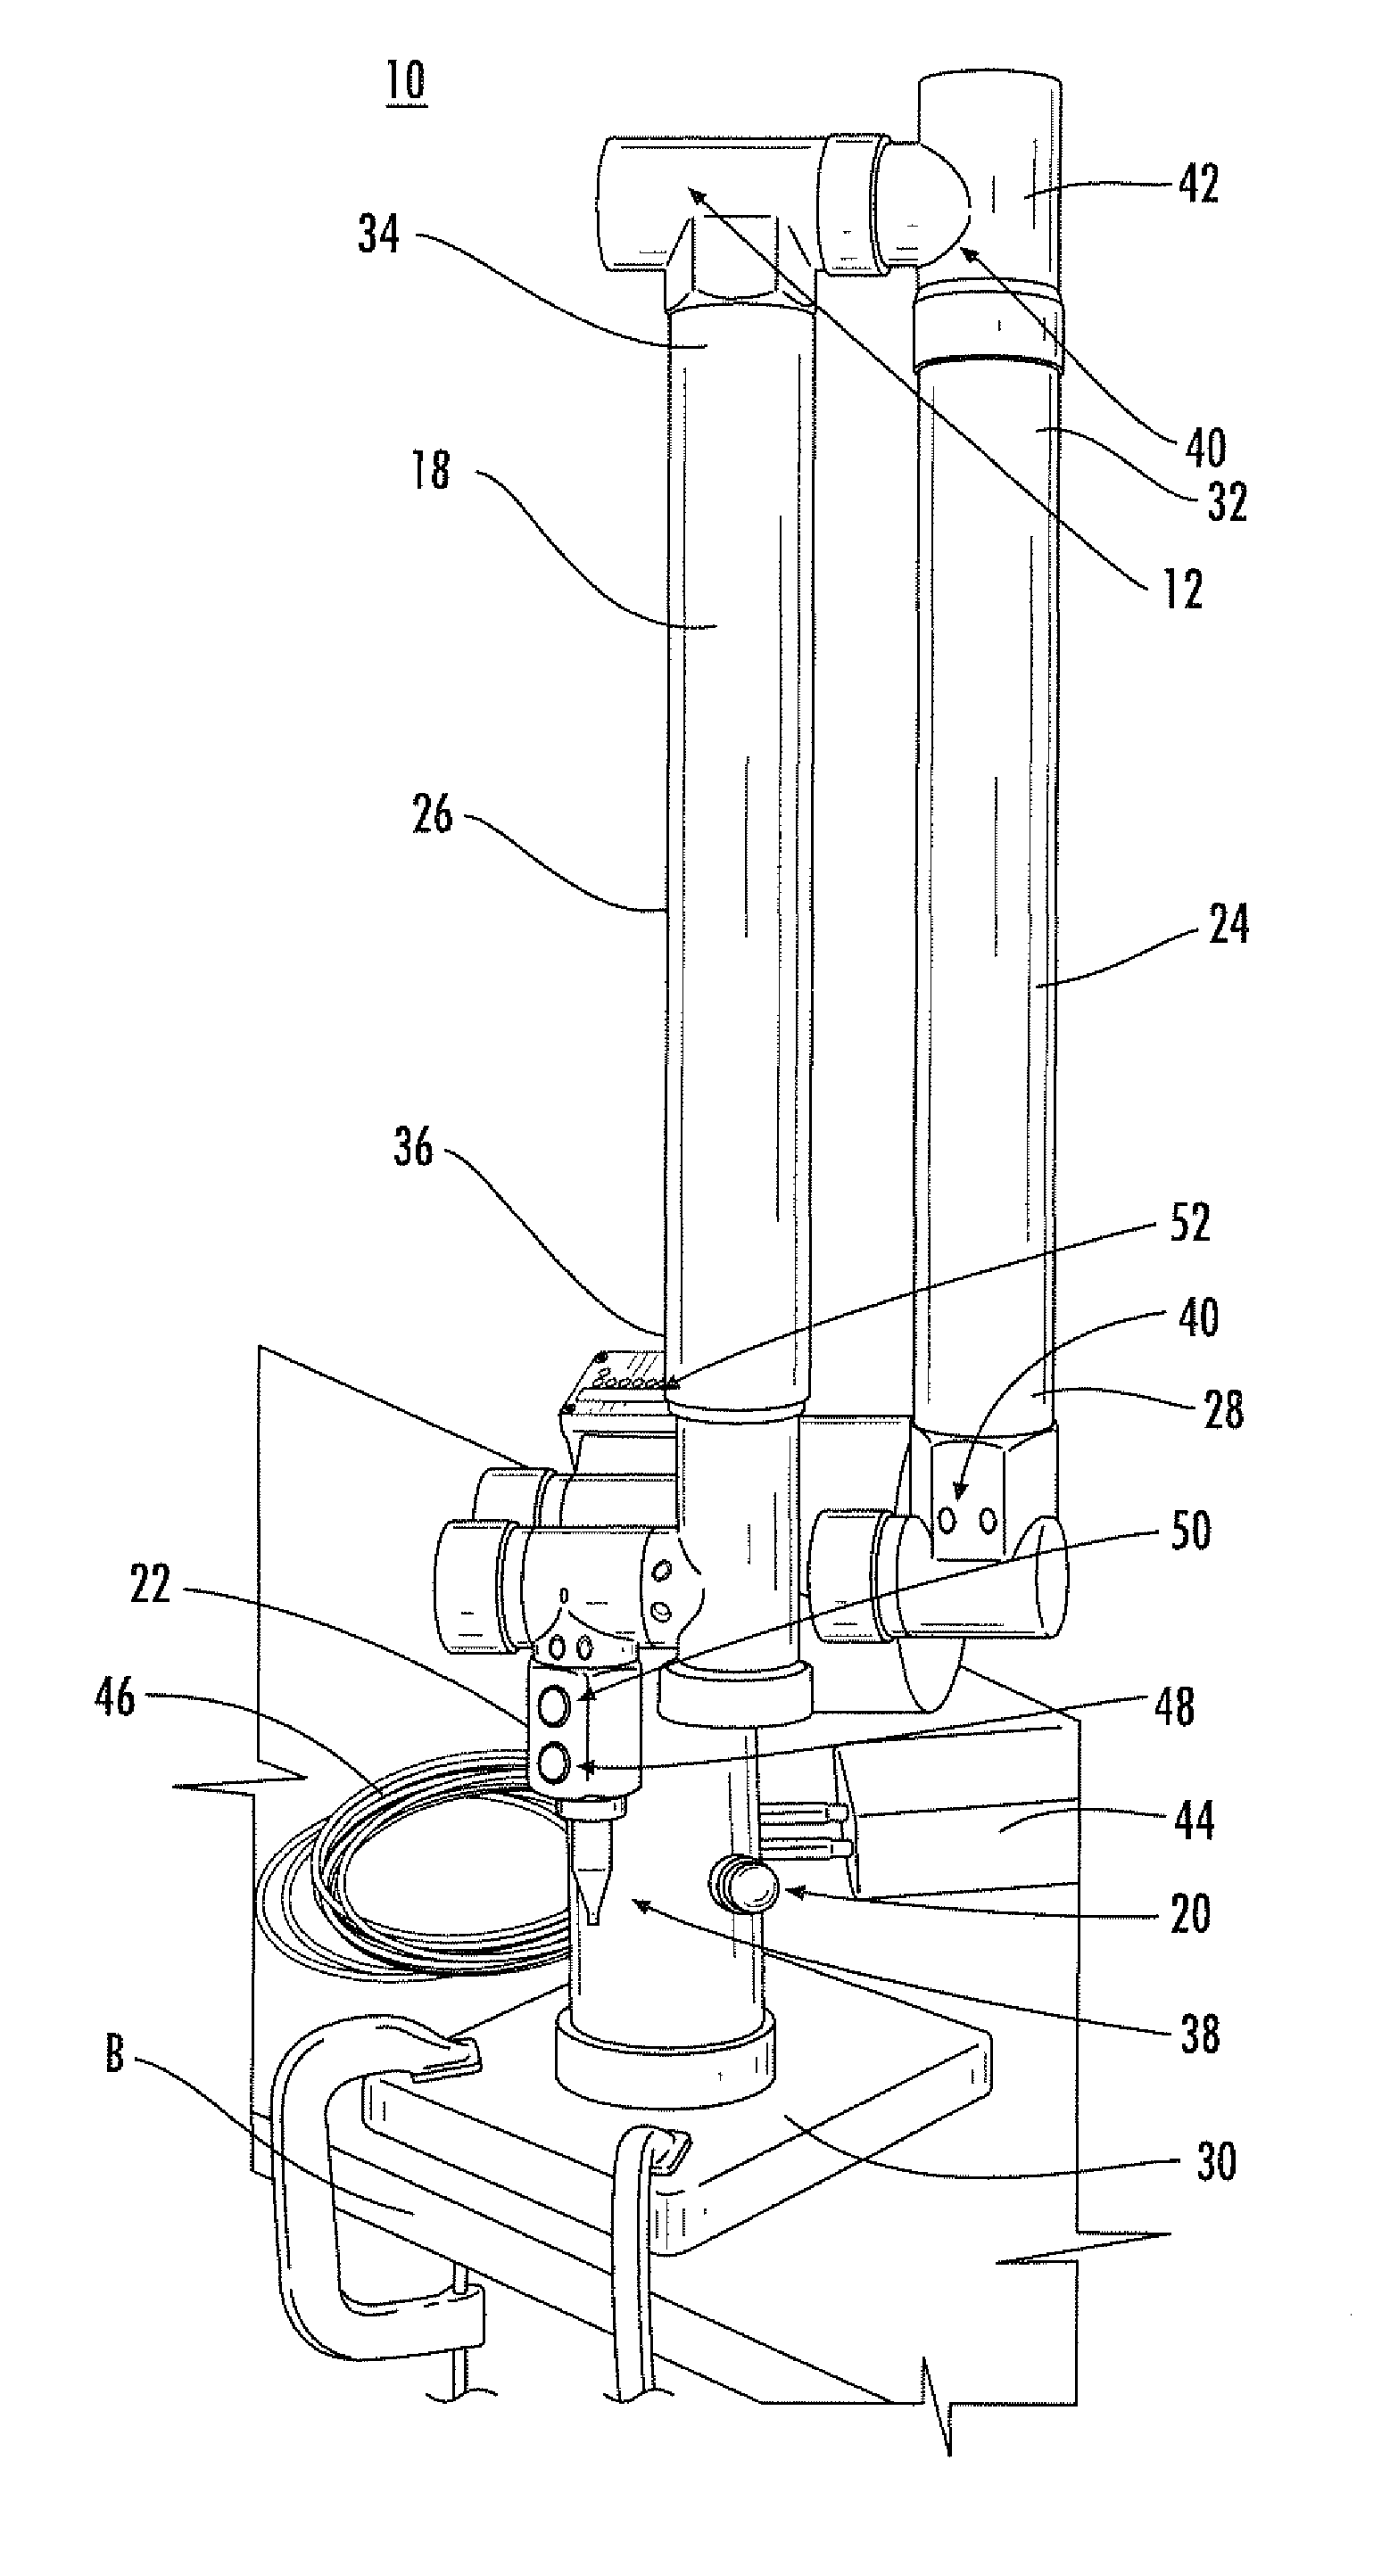 Device for measuring load and deflection of materials